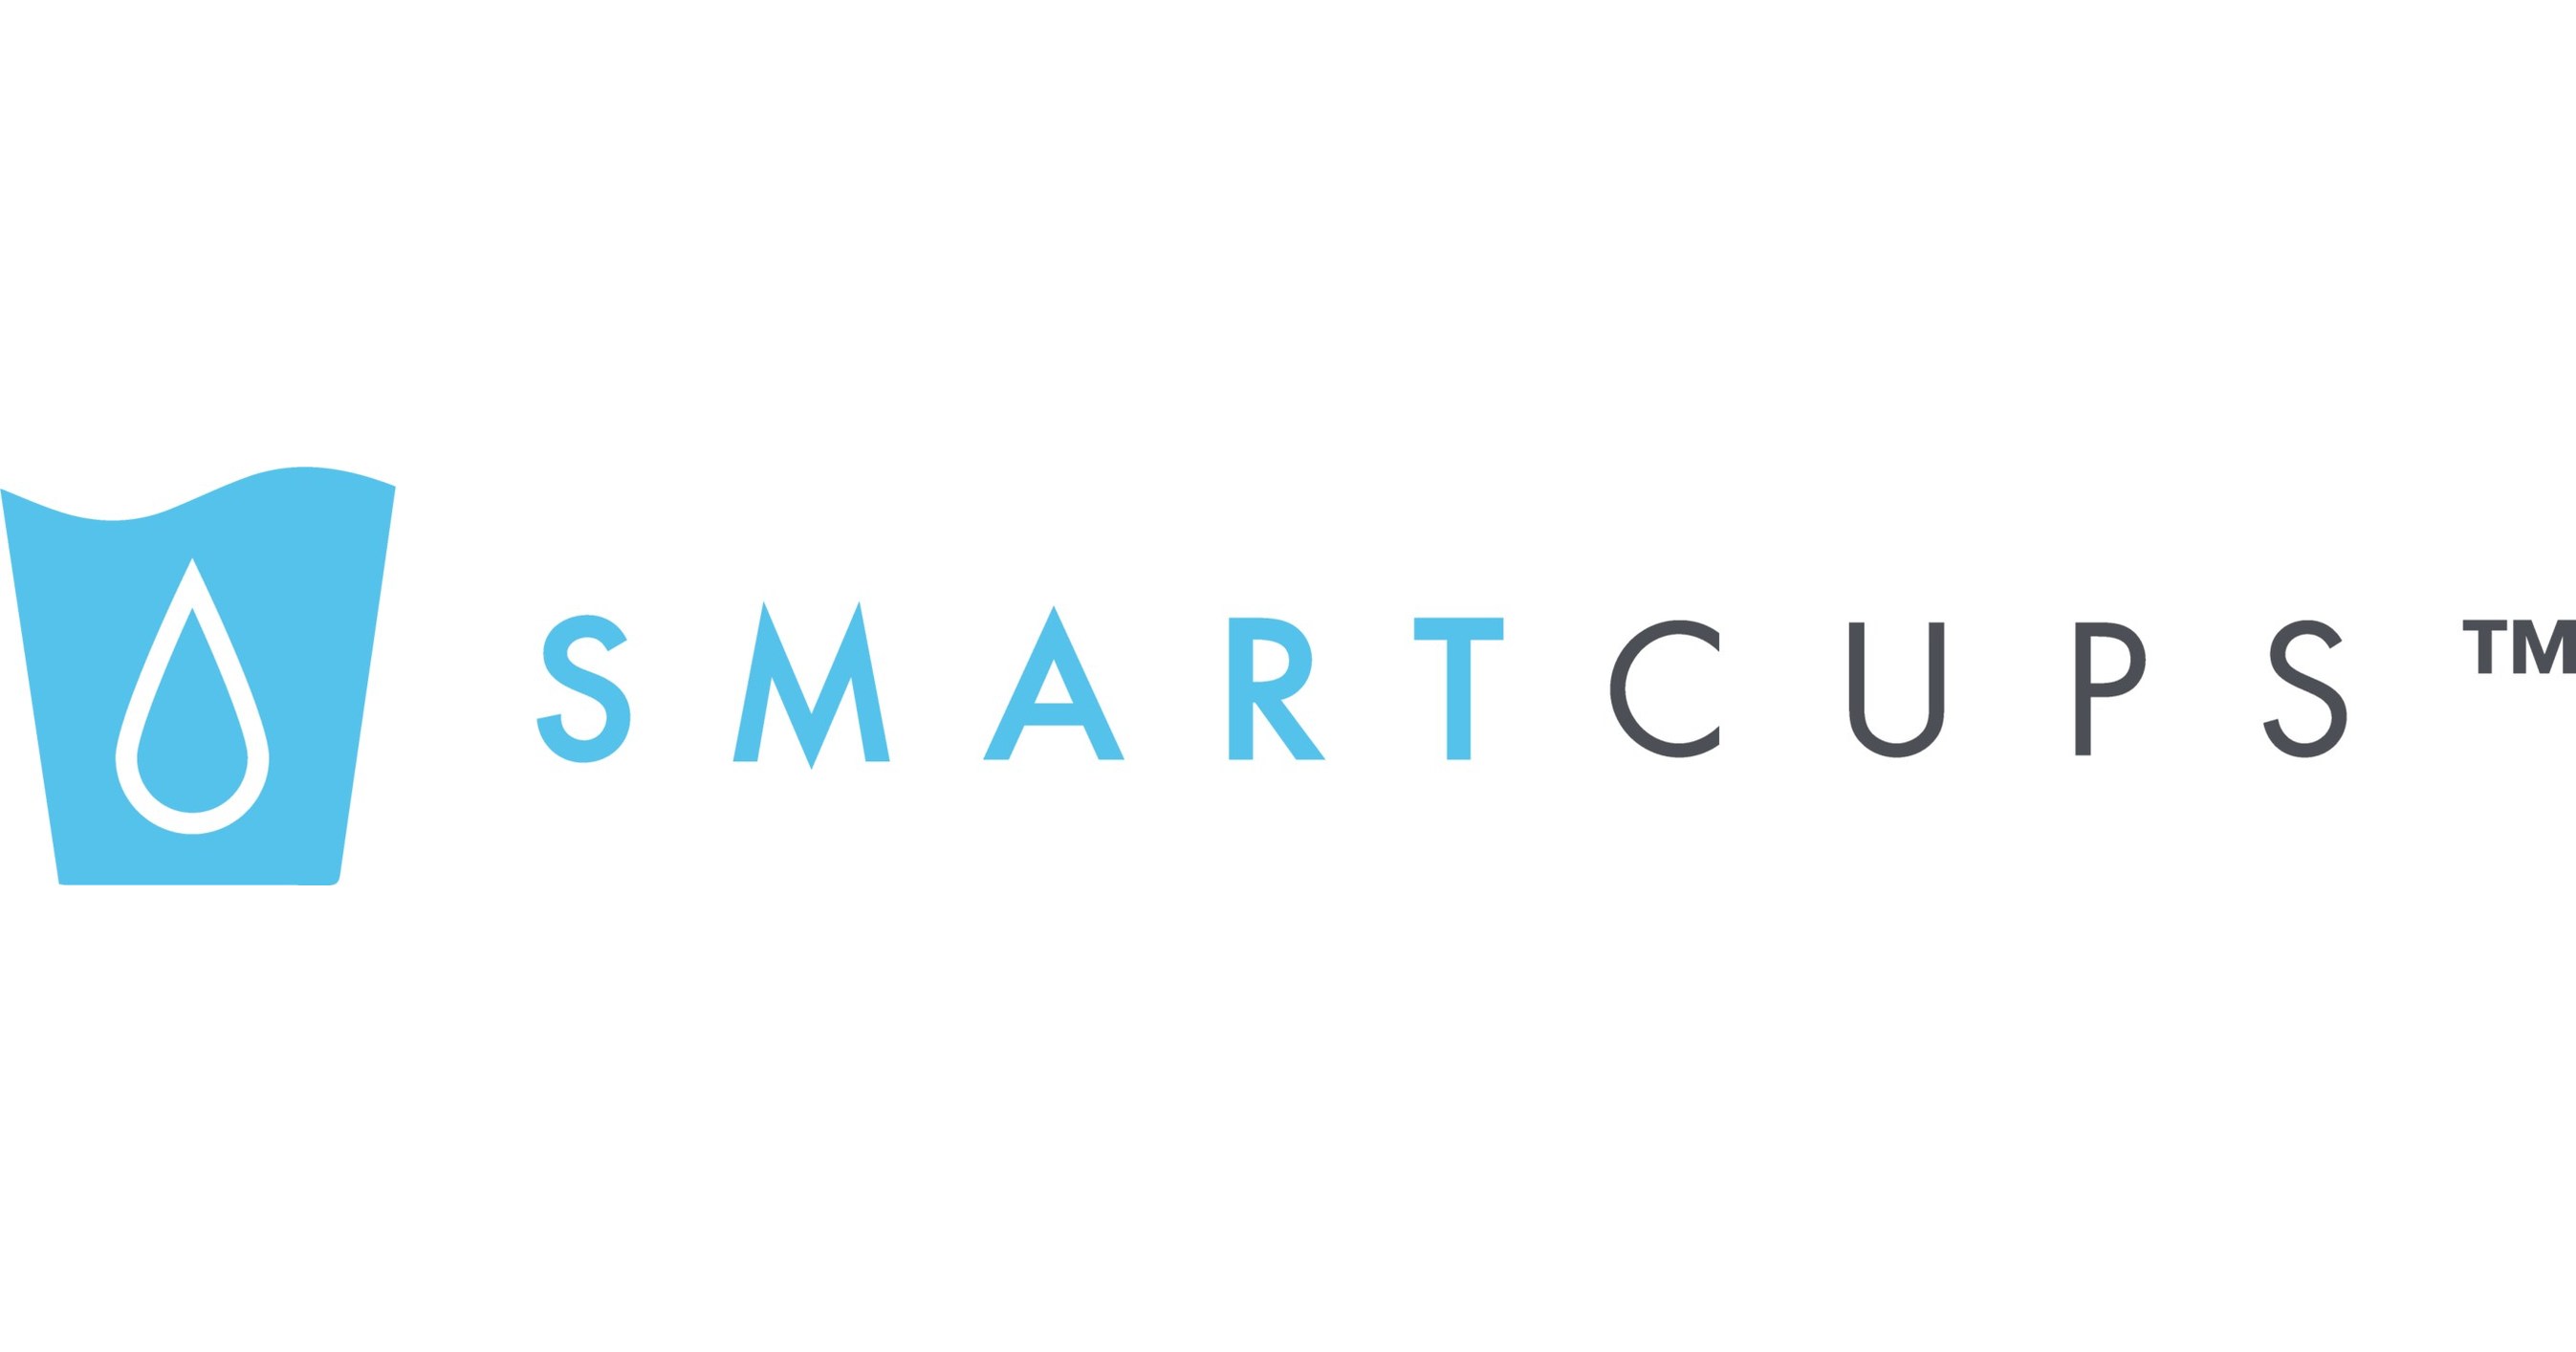 Smart Cups releases its first 3D-printed energy drink cups